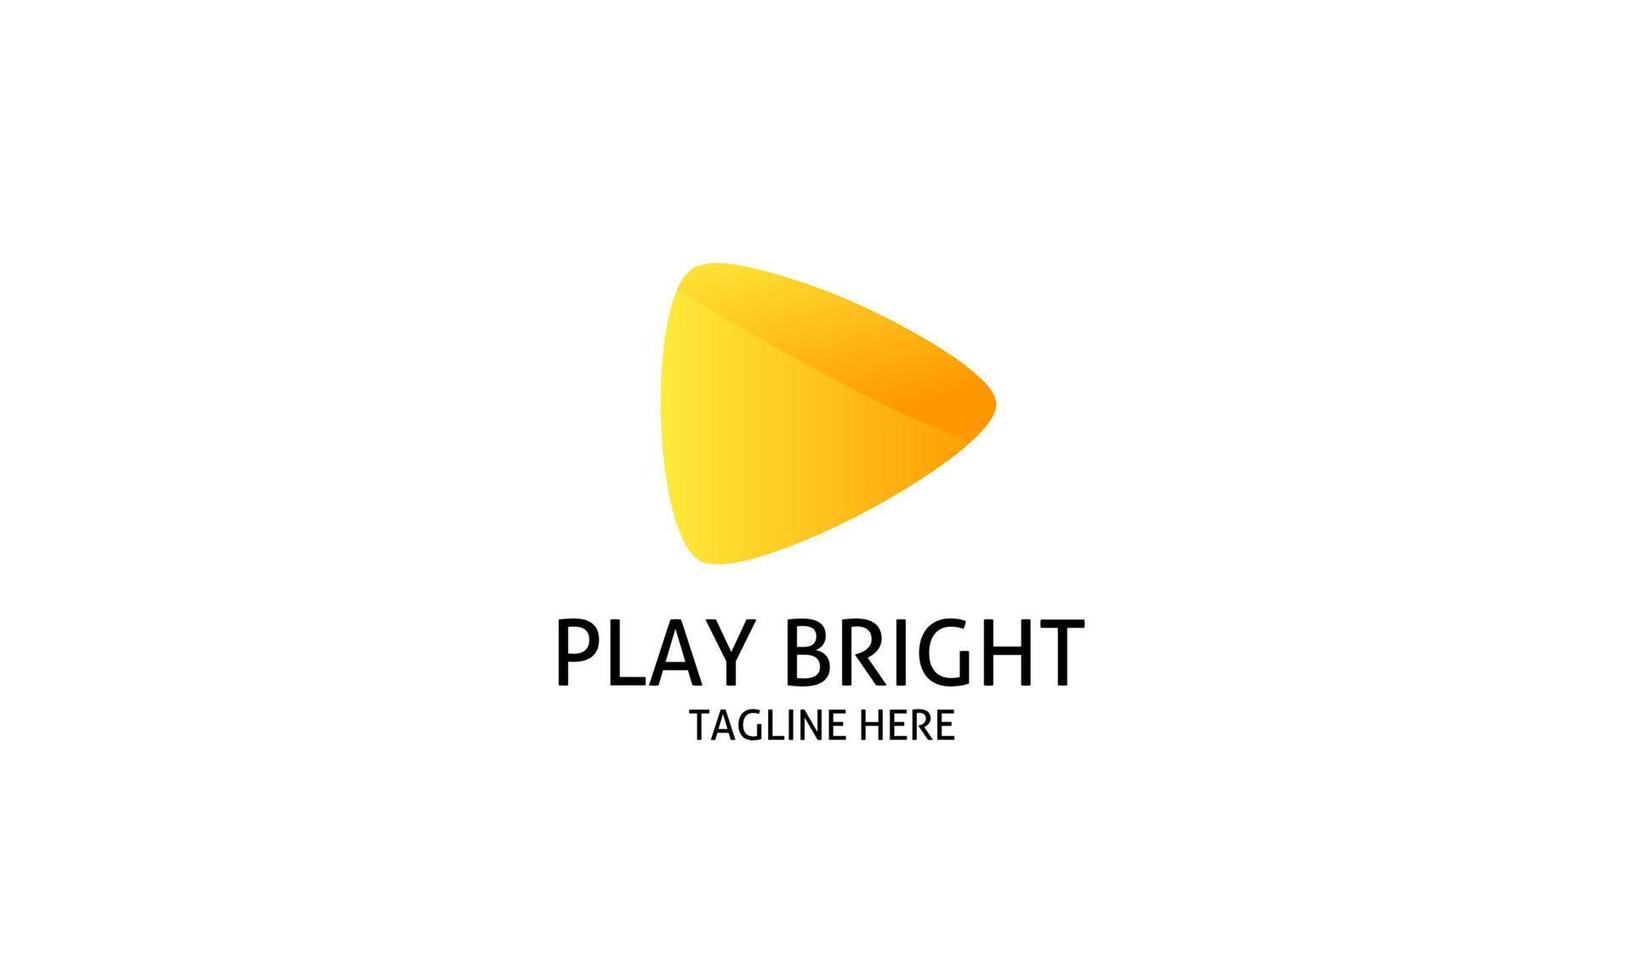 Trendy and bright play button logo design for music or video media apps vector